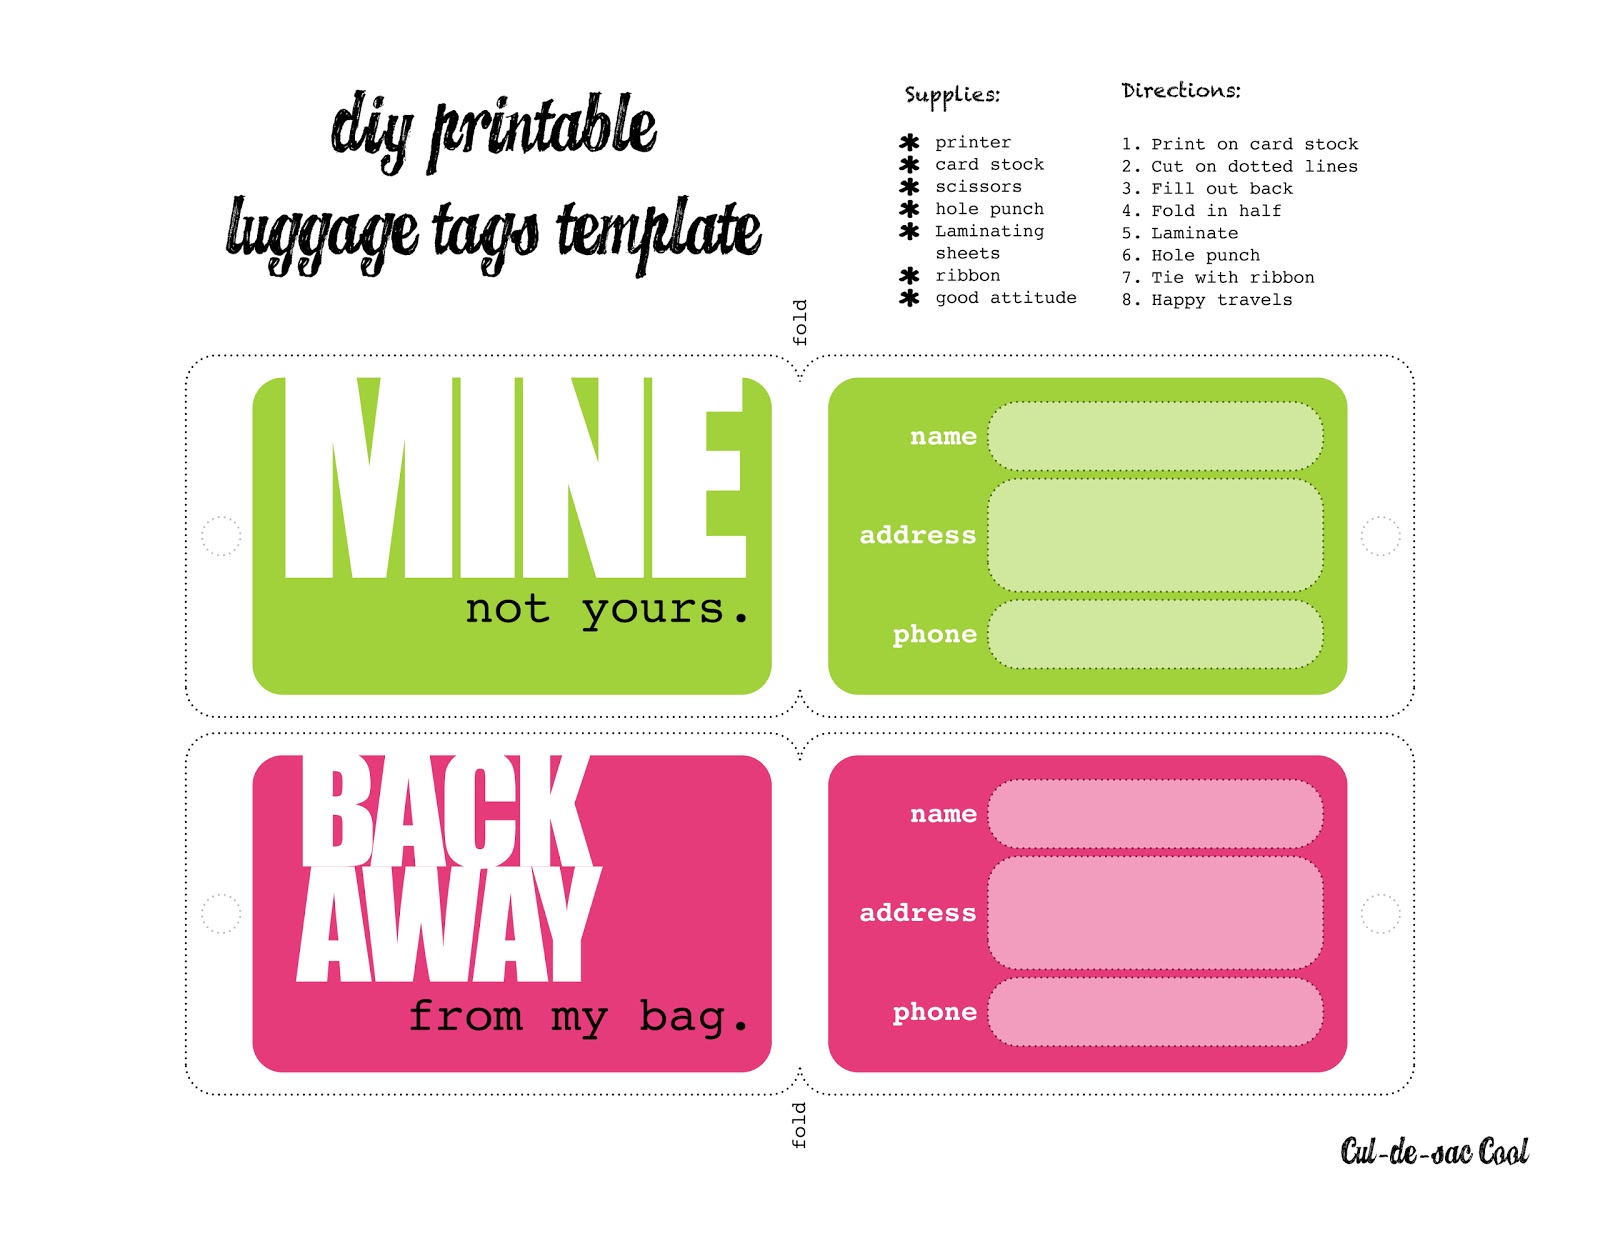 Bag Tools Images: Bag Tag Template For Luggage Tag Template Word